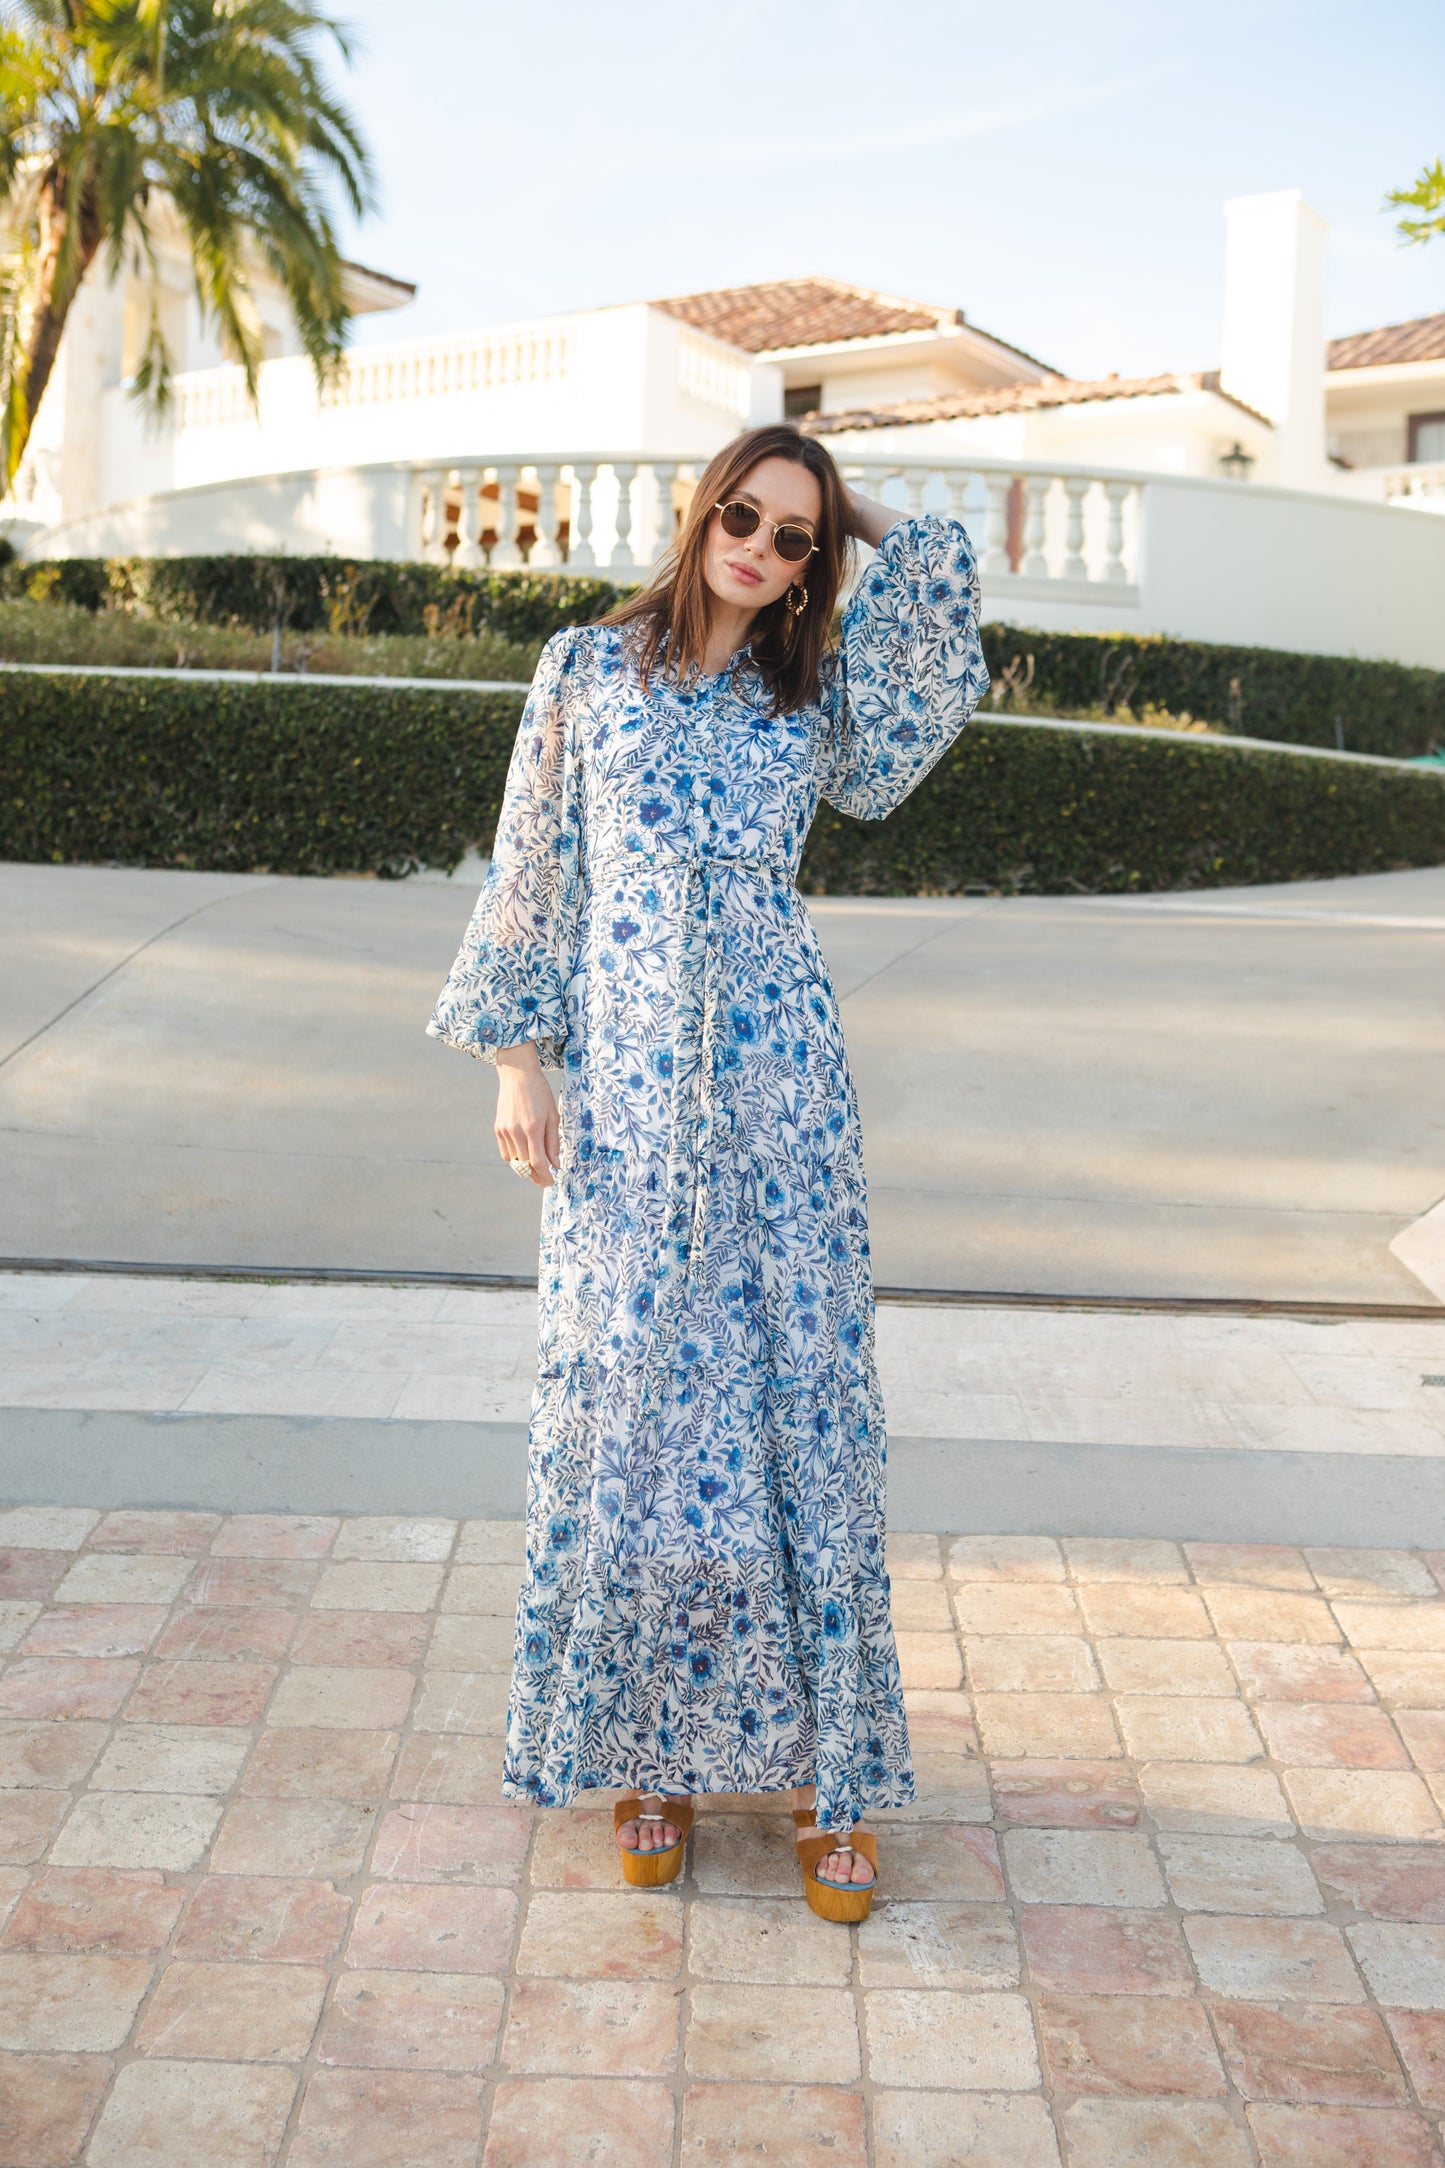 jennafer grace Bluebelle Bookie Maxi Dress white with modern cobalt blue watercolor floral print collared button up maxi dress cinched waist belt bishop sleeves boho bohemian hippie romantic whimsical summer holiday dress handmade in California USA